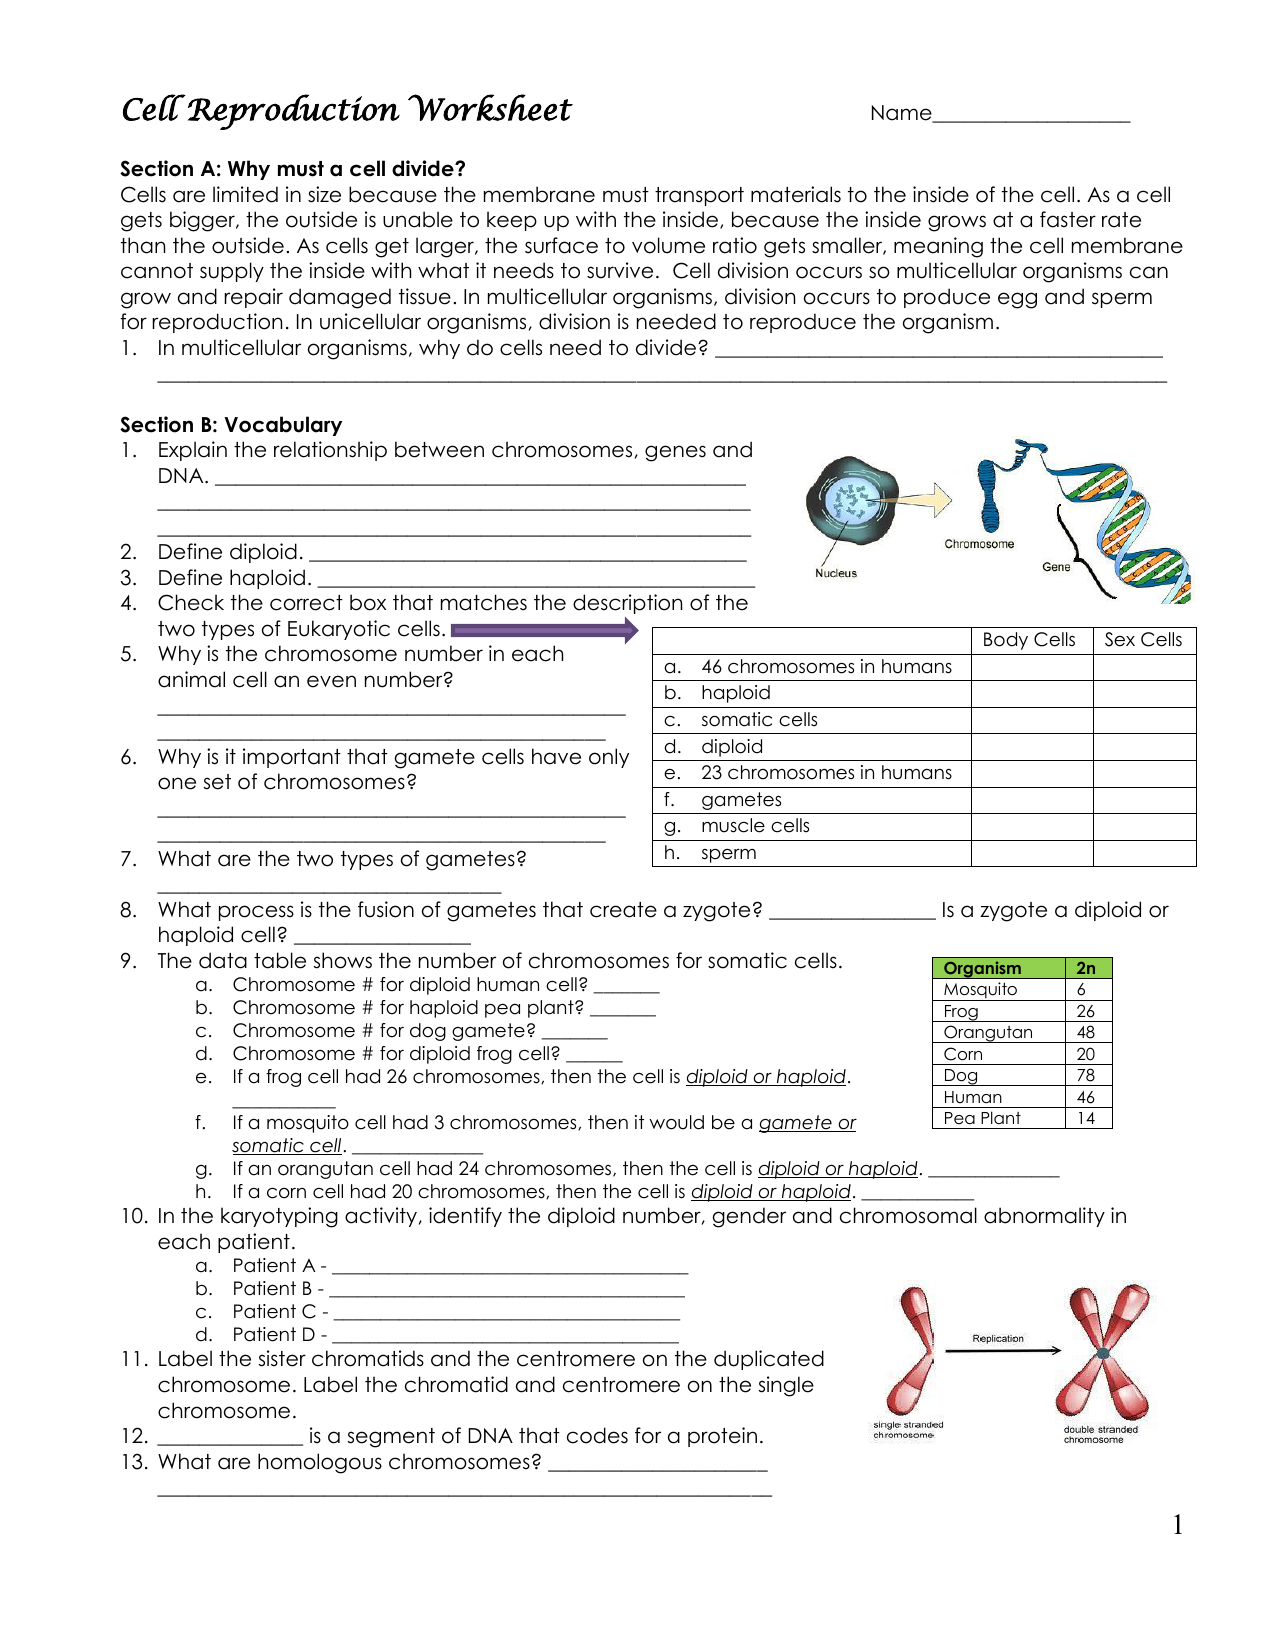 Chromosomes And Cell Reproduction Worksheet Answers - Nidecmege In Cell Reproduction Worksheet Answers